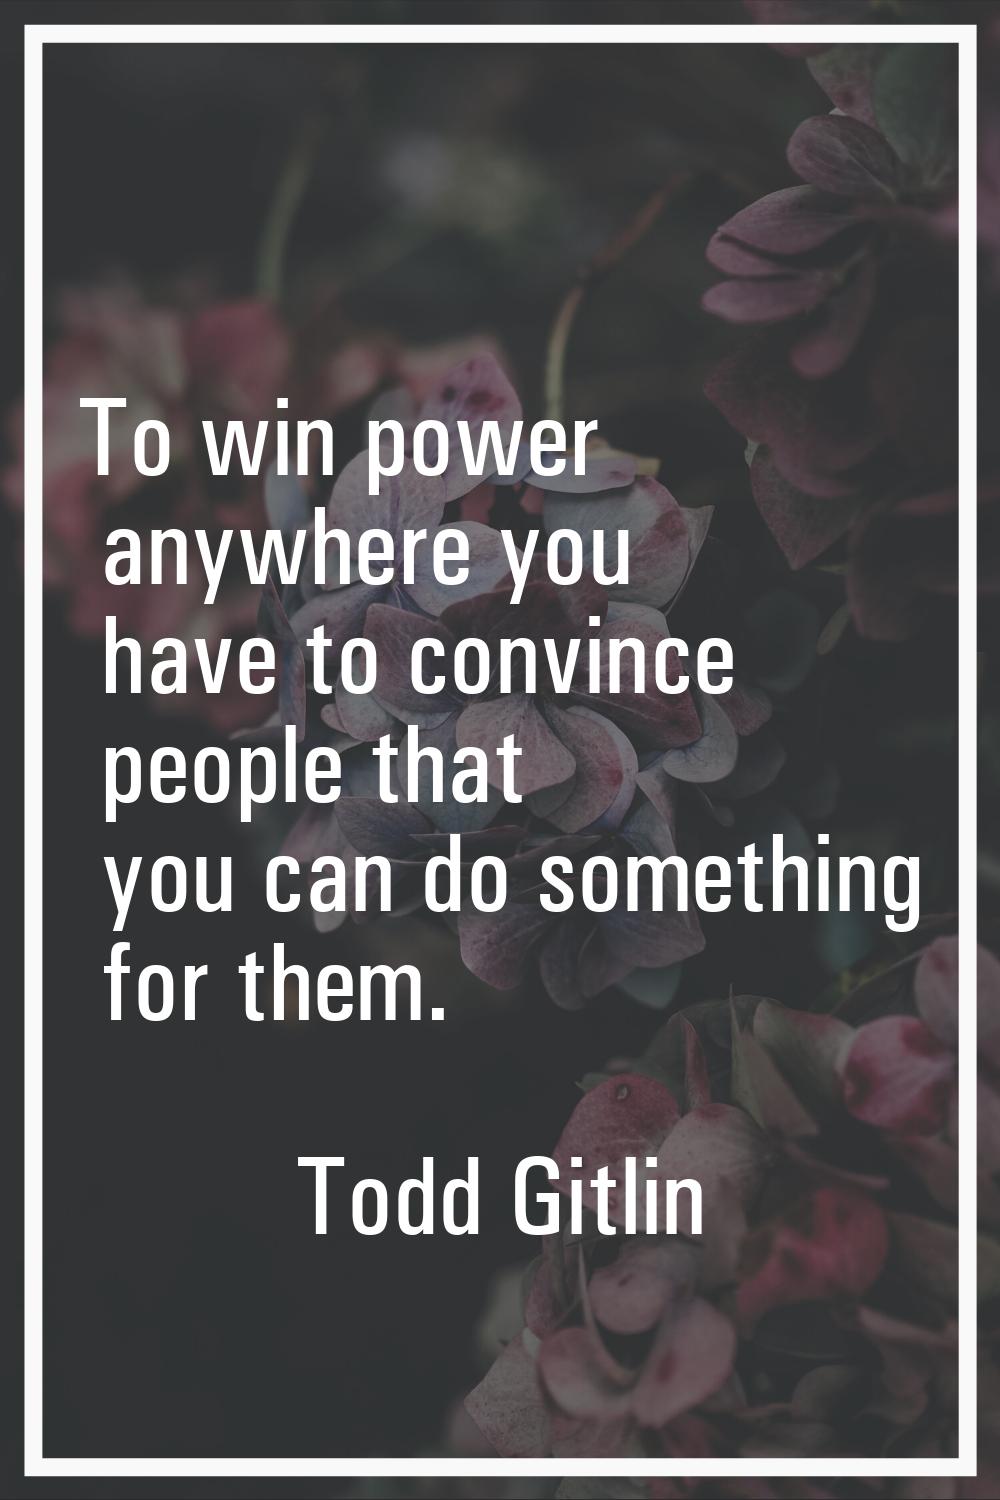 To win power anywhere you have to convince people that you can do something for them.